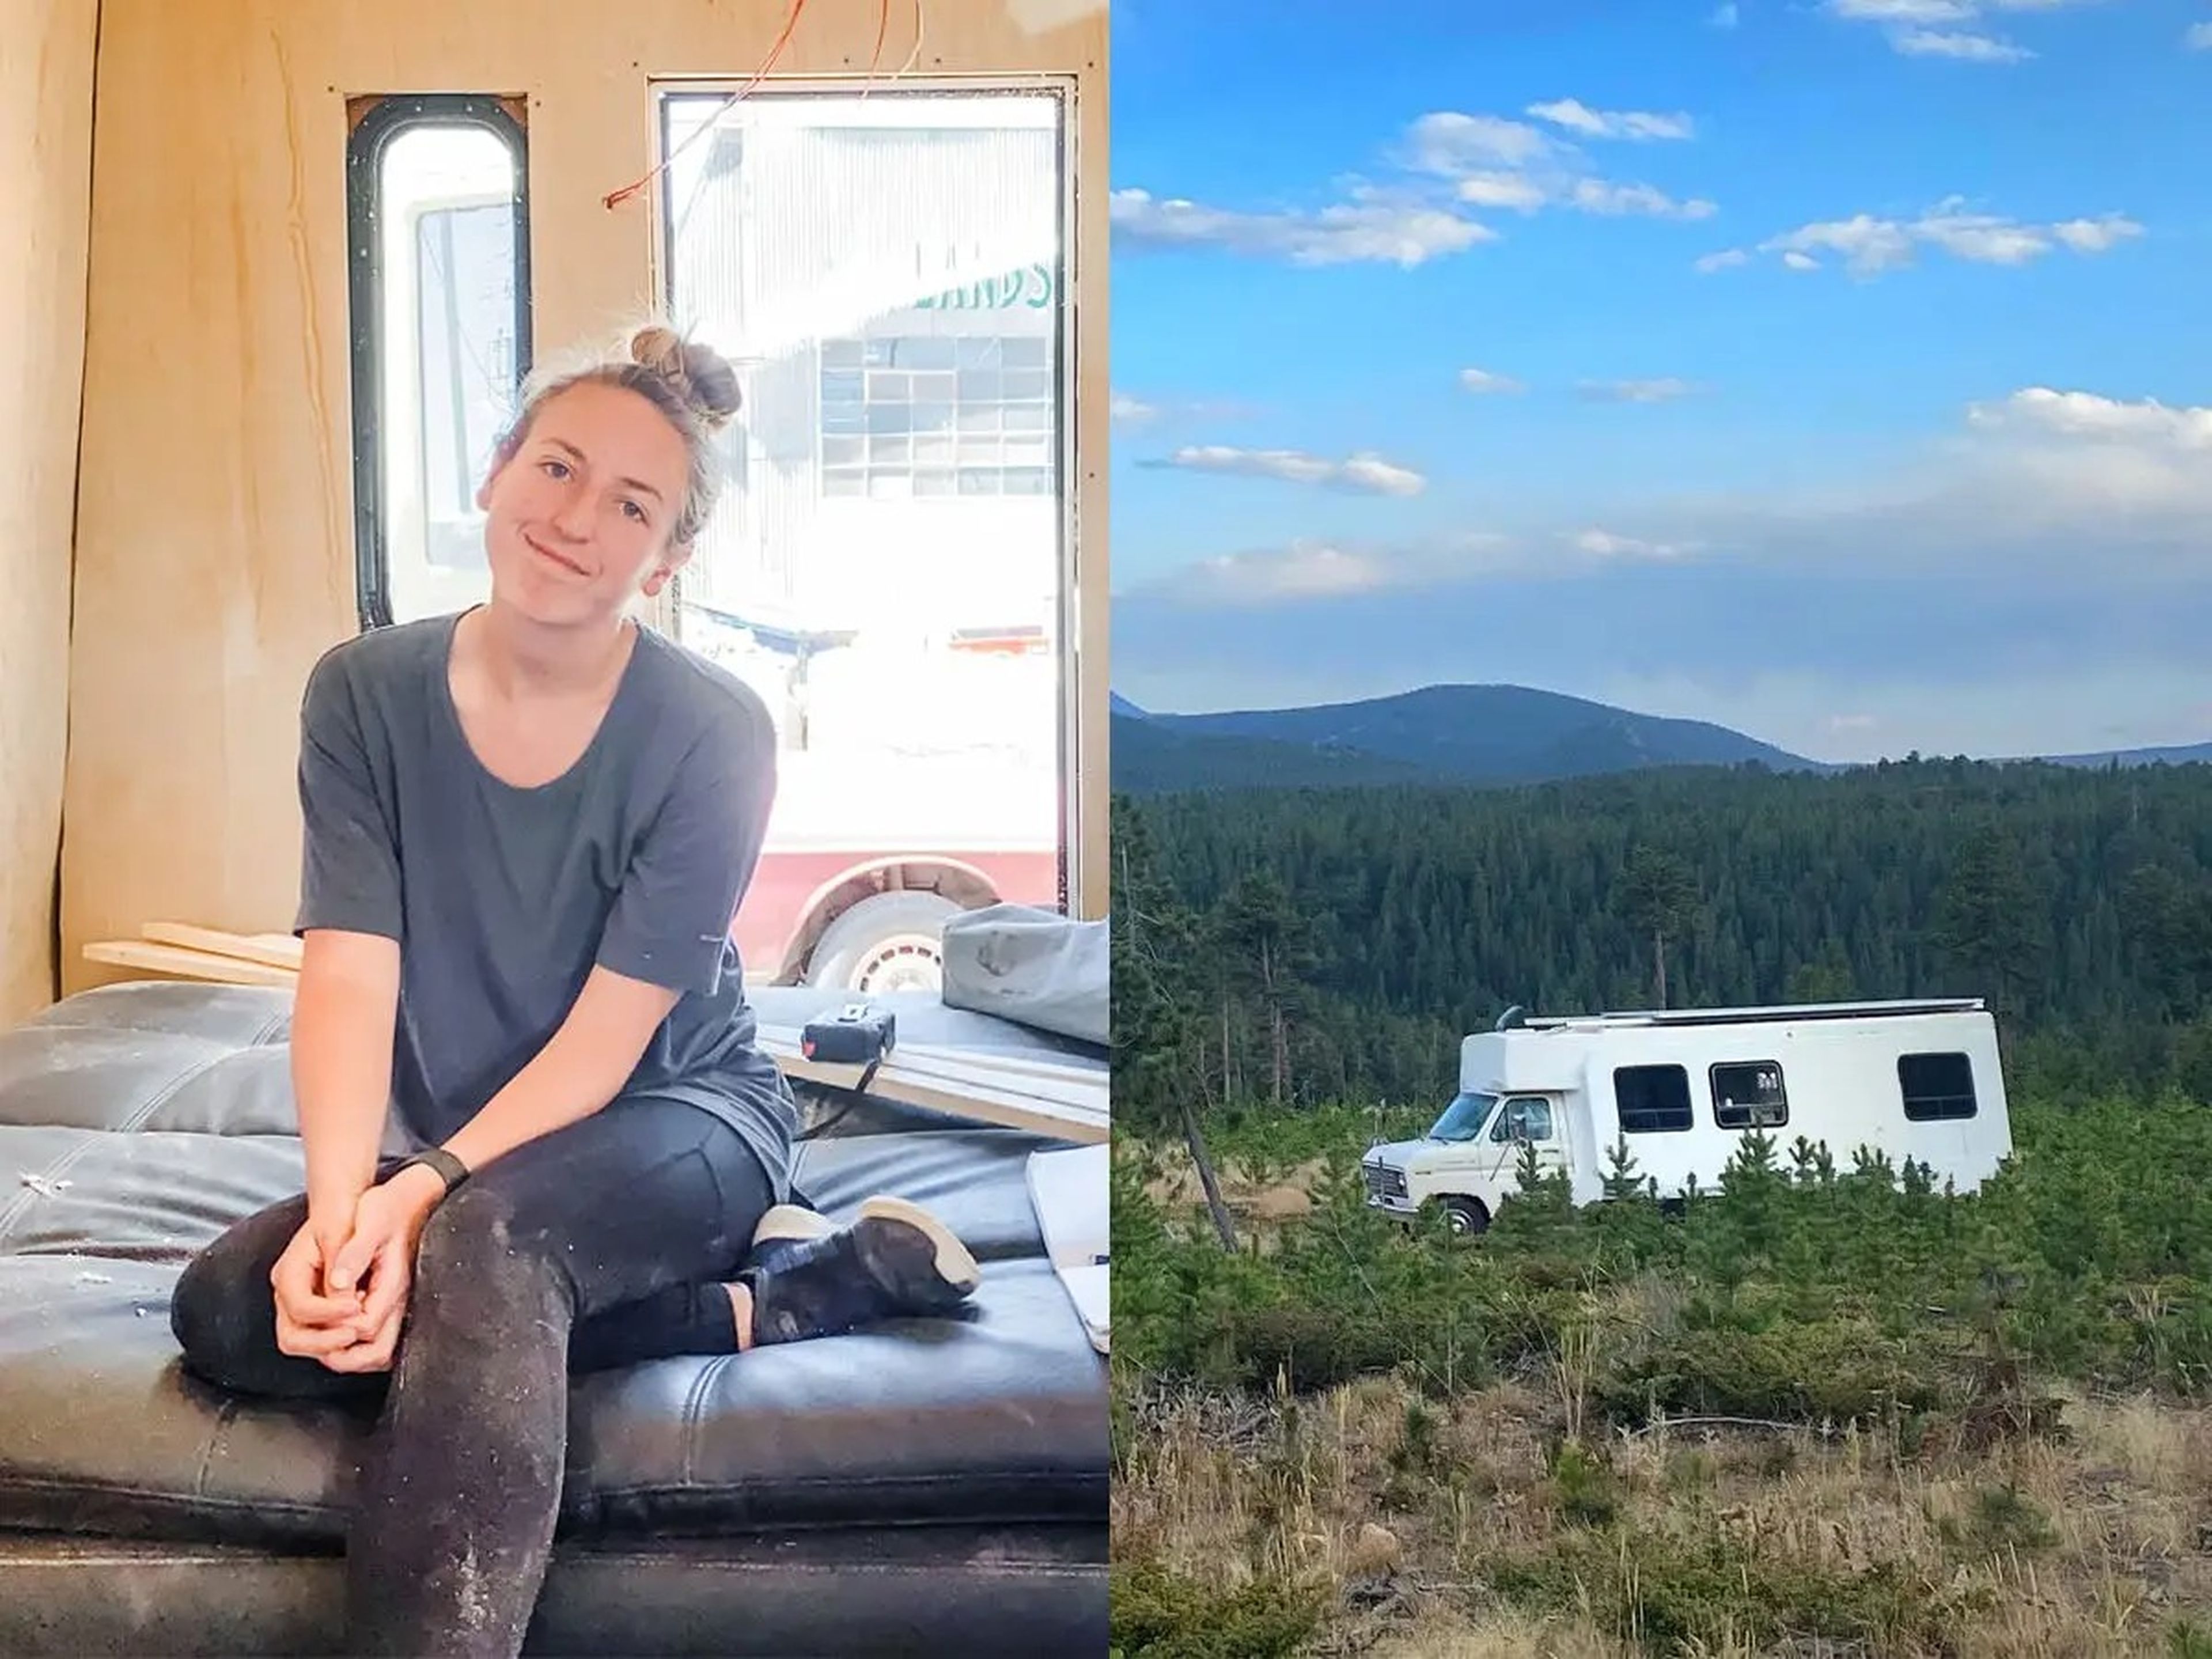 On the left, Brittany Burrows sitting in her under-construction tiny home. On the right, the shuttle bus outside in nature